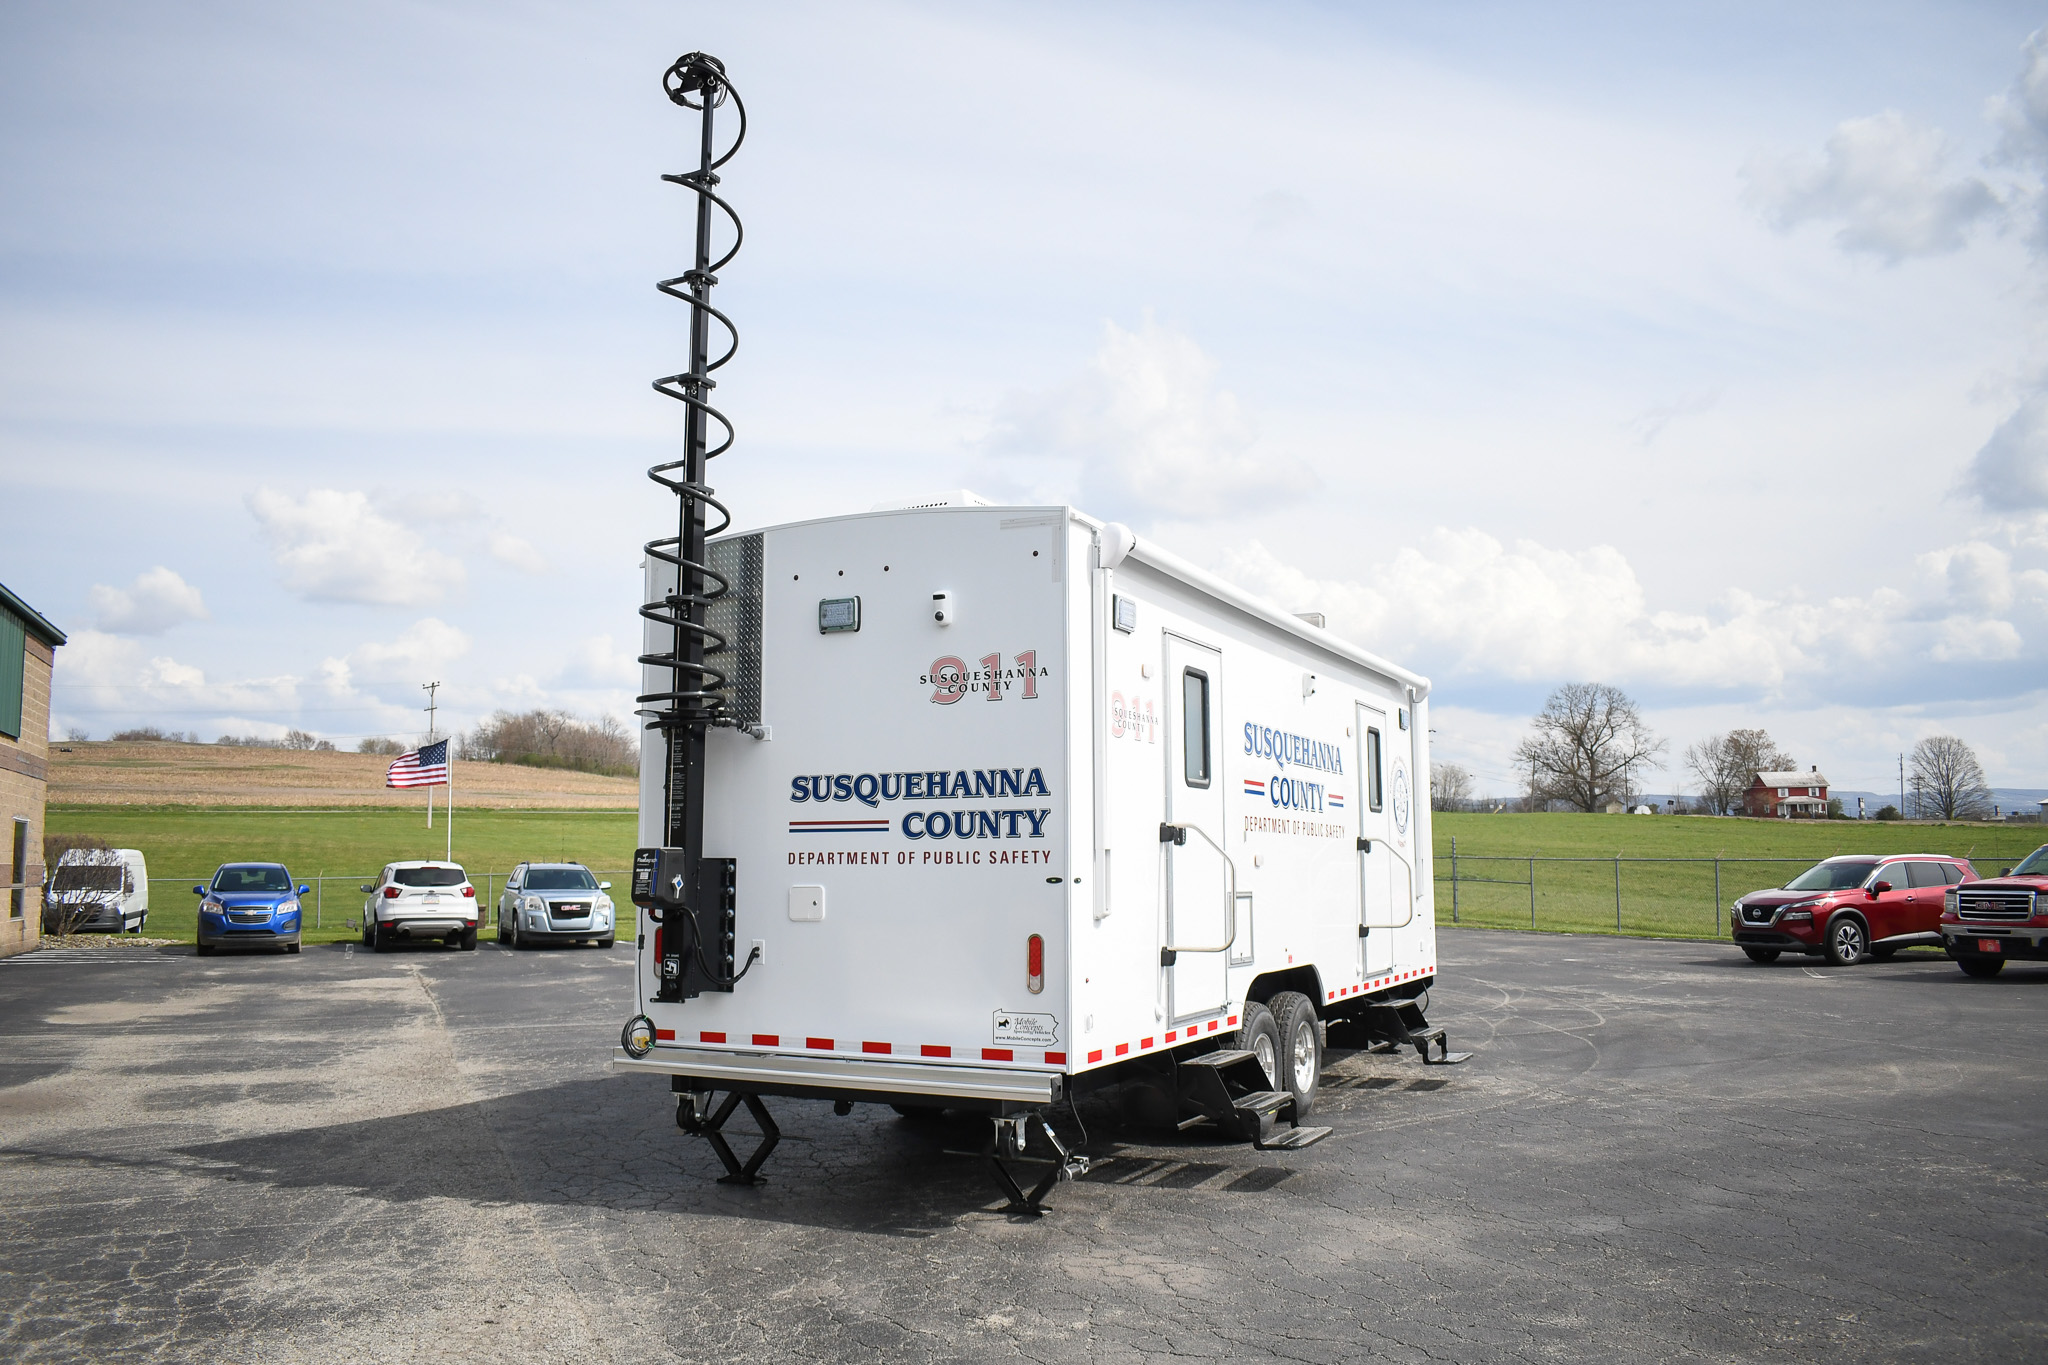 An exterior view of the unit for Susquehanna County, PA.